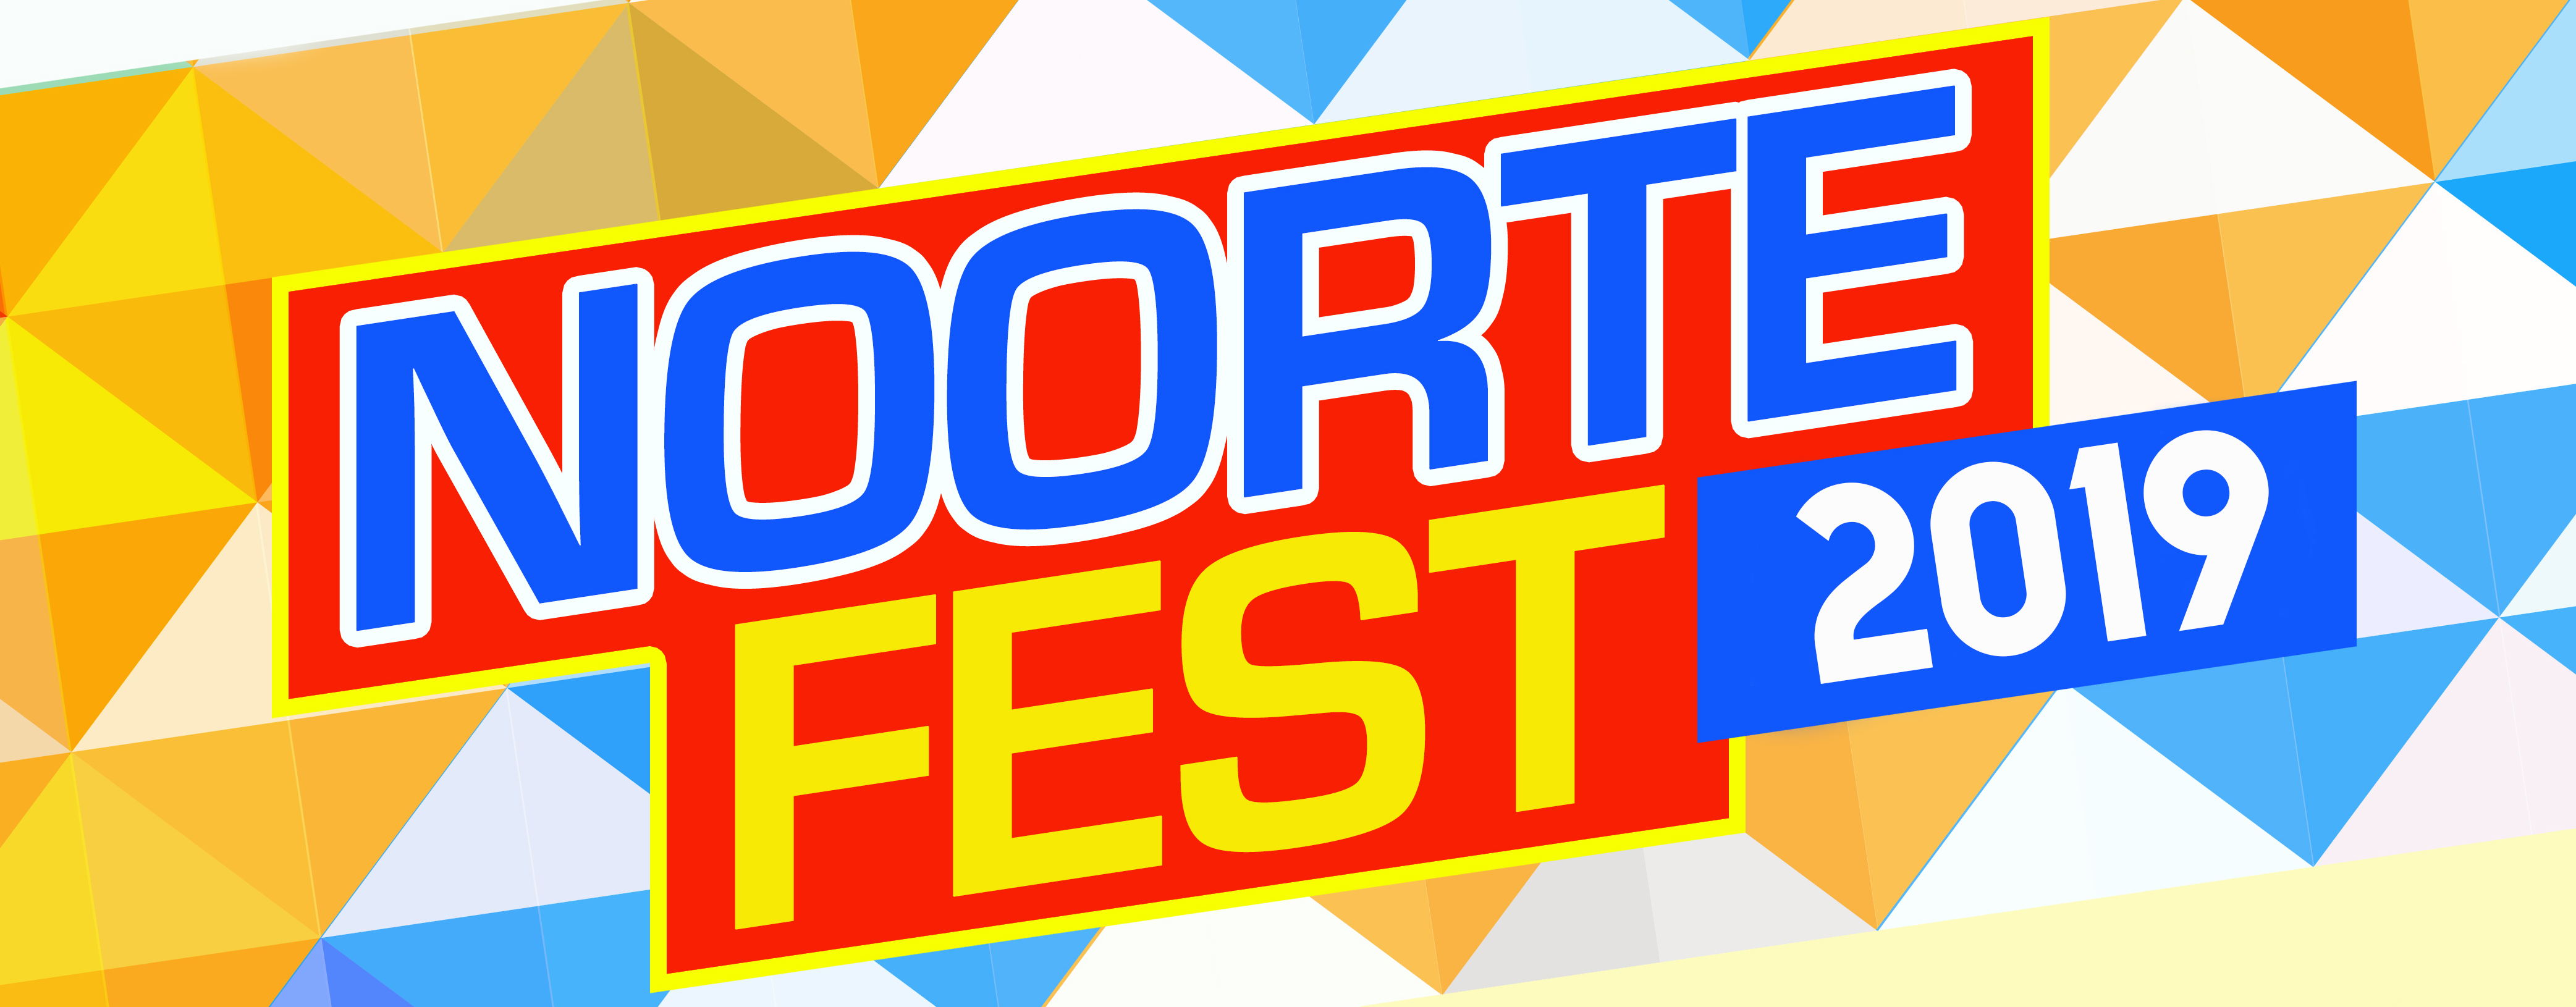 You are currently viewing NOORTEFEST 2019